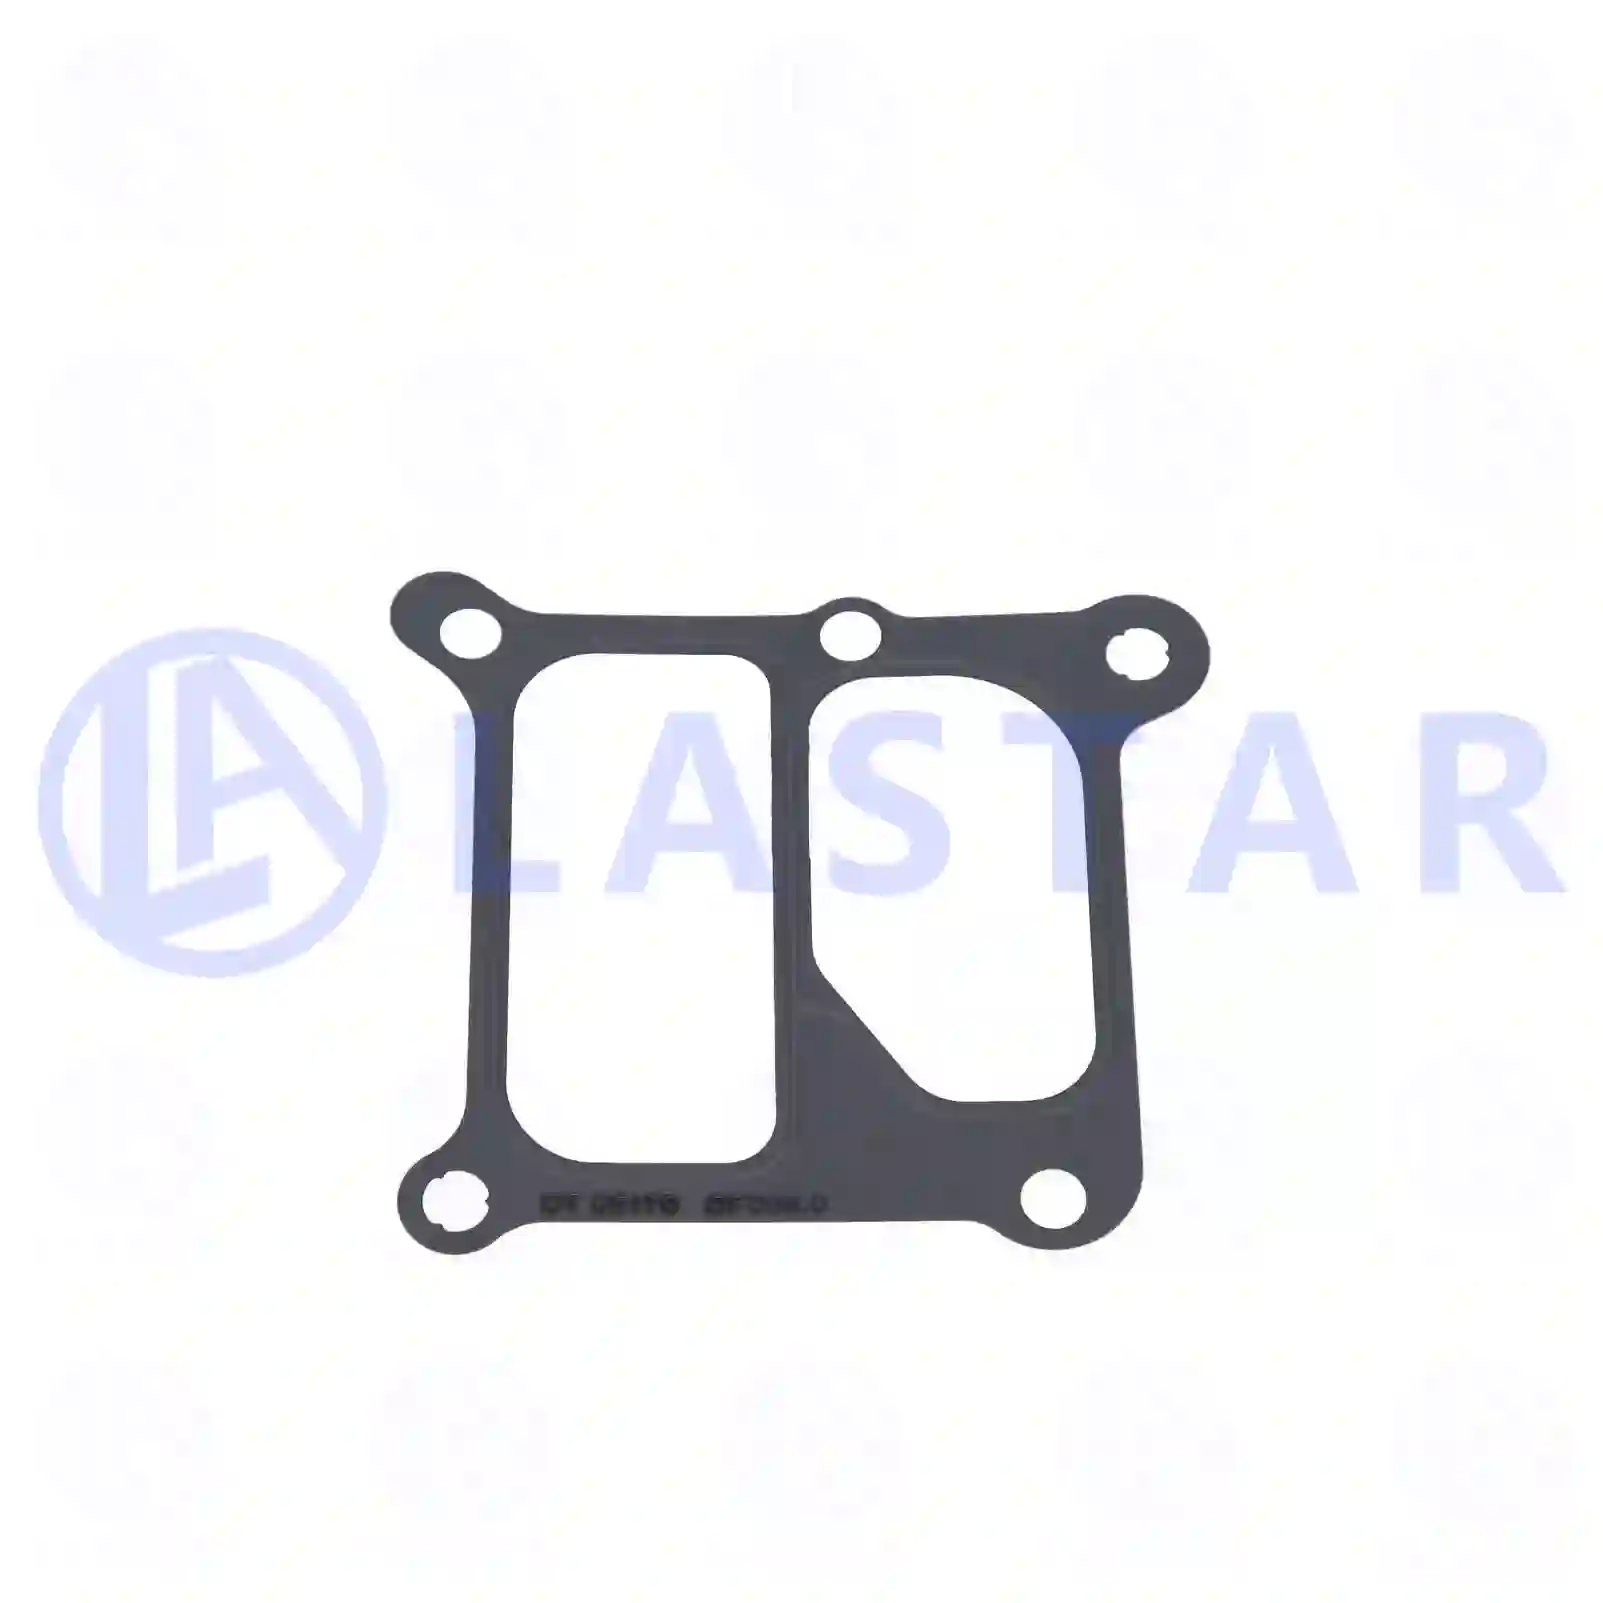 Gasket, cooling water pipe, 77709274, 7403161465, 3161465, ZG01173-0008 ||  77709274 Lastar Spare Part | Truck Spare Parts, Auotomotive Spare Parts Gasket, cooling water pipe, 77709274, 7403161465, 3161465, ZG01173-0008 ||  77709274 Lastar Spare Part | Truck Spare Parts, Auotomotive Spare Parts